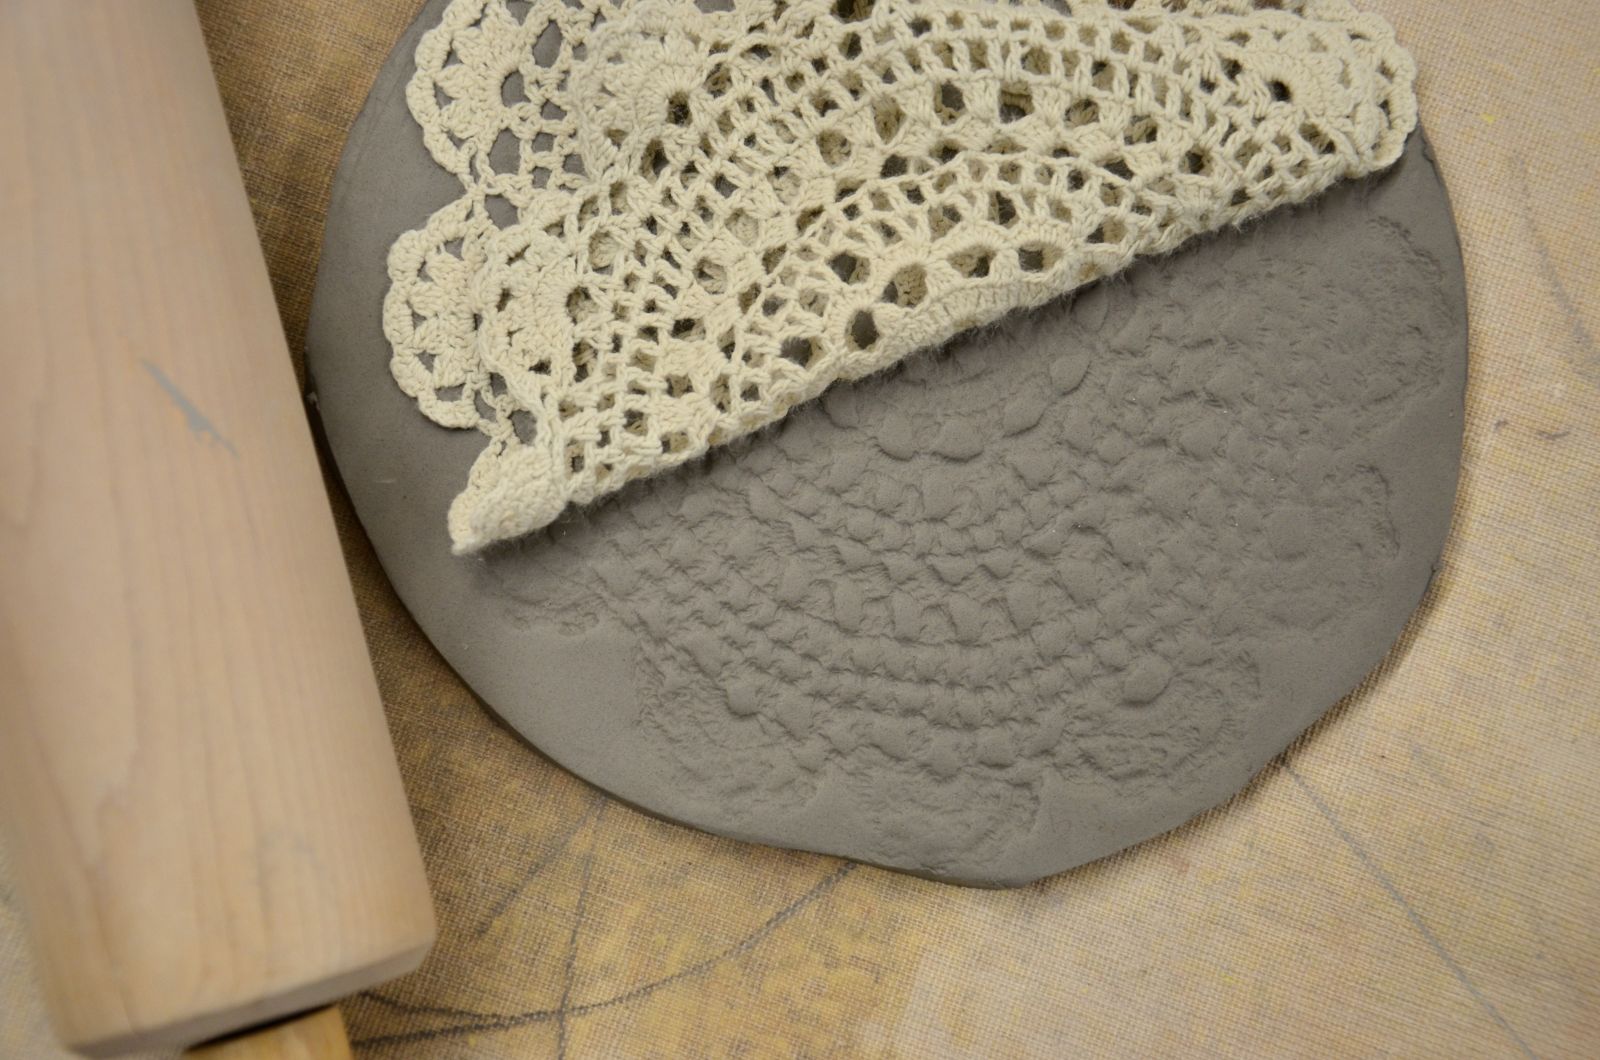 Using a doily to create texture in clay